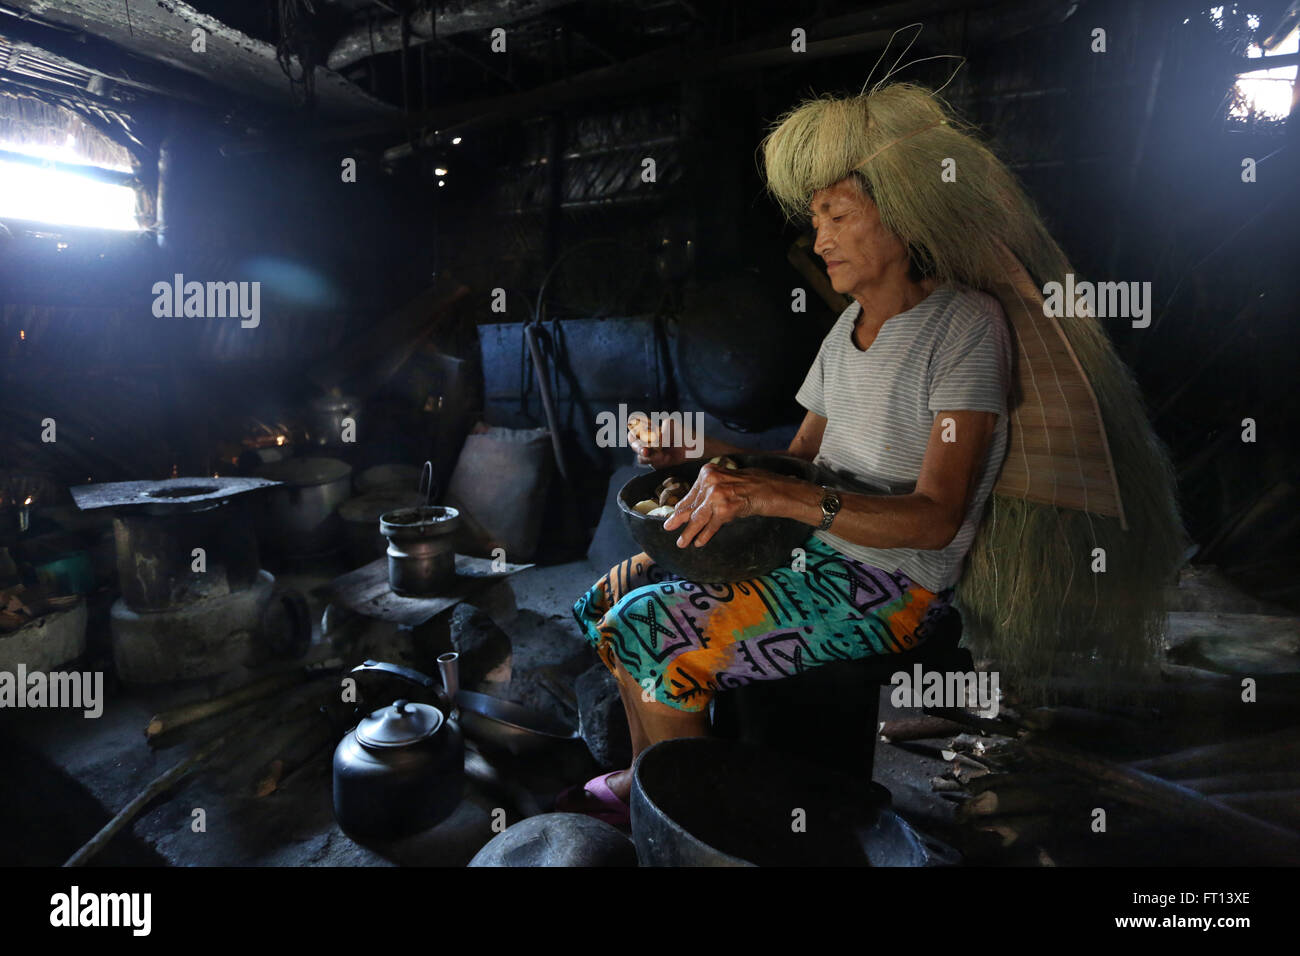 Ivatan woman cooking inside an old kitchen in Chavayan village, wearing a typical straw wig, Sabtang Island, Batanes, Philippines, Asia Stock Photo